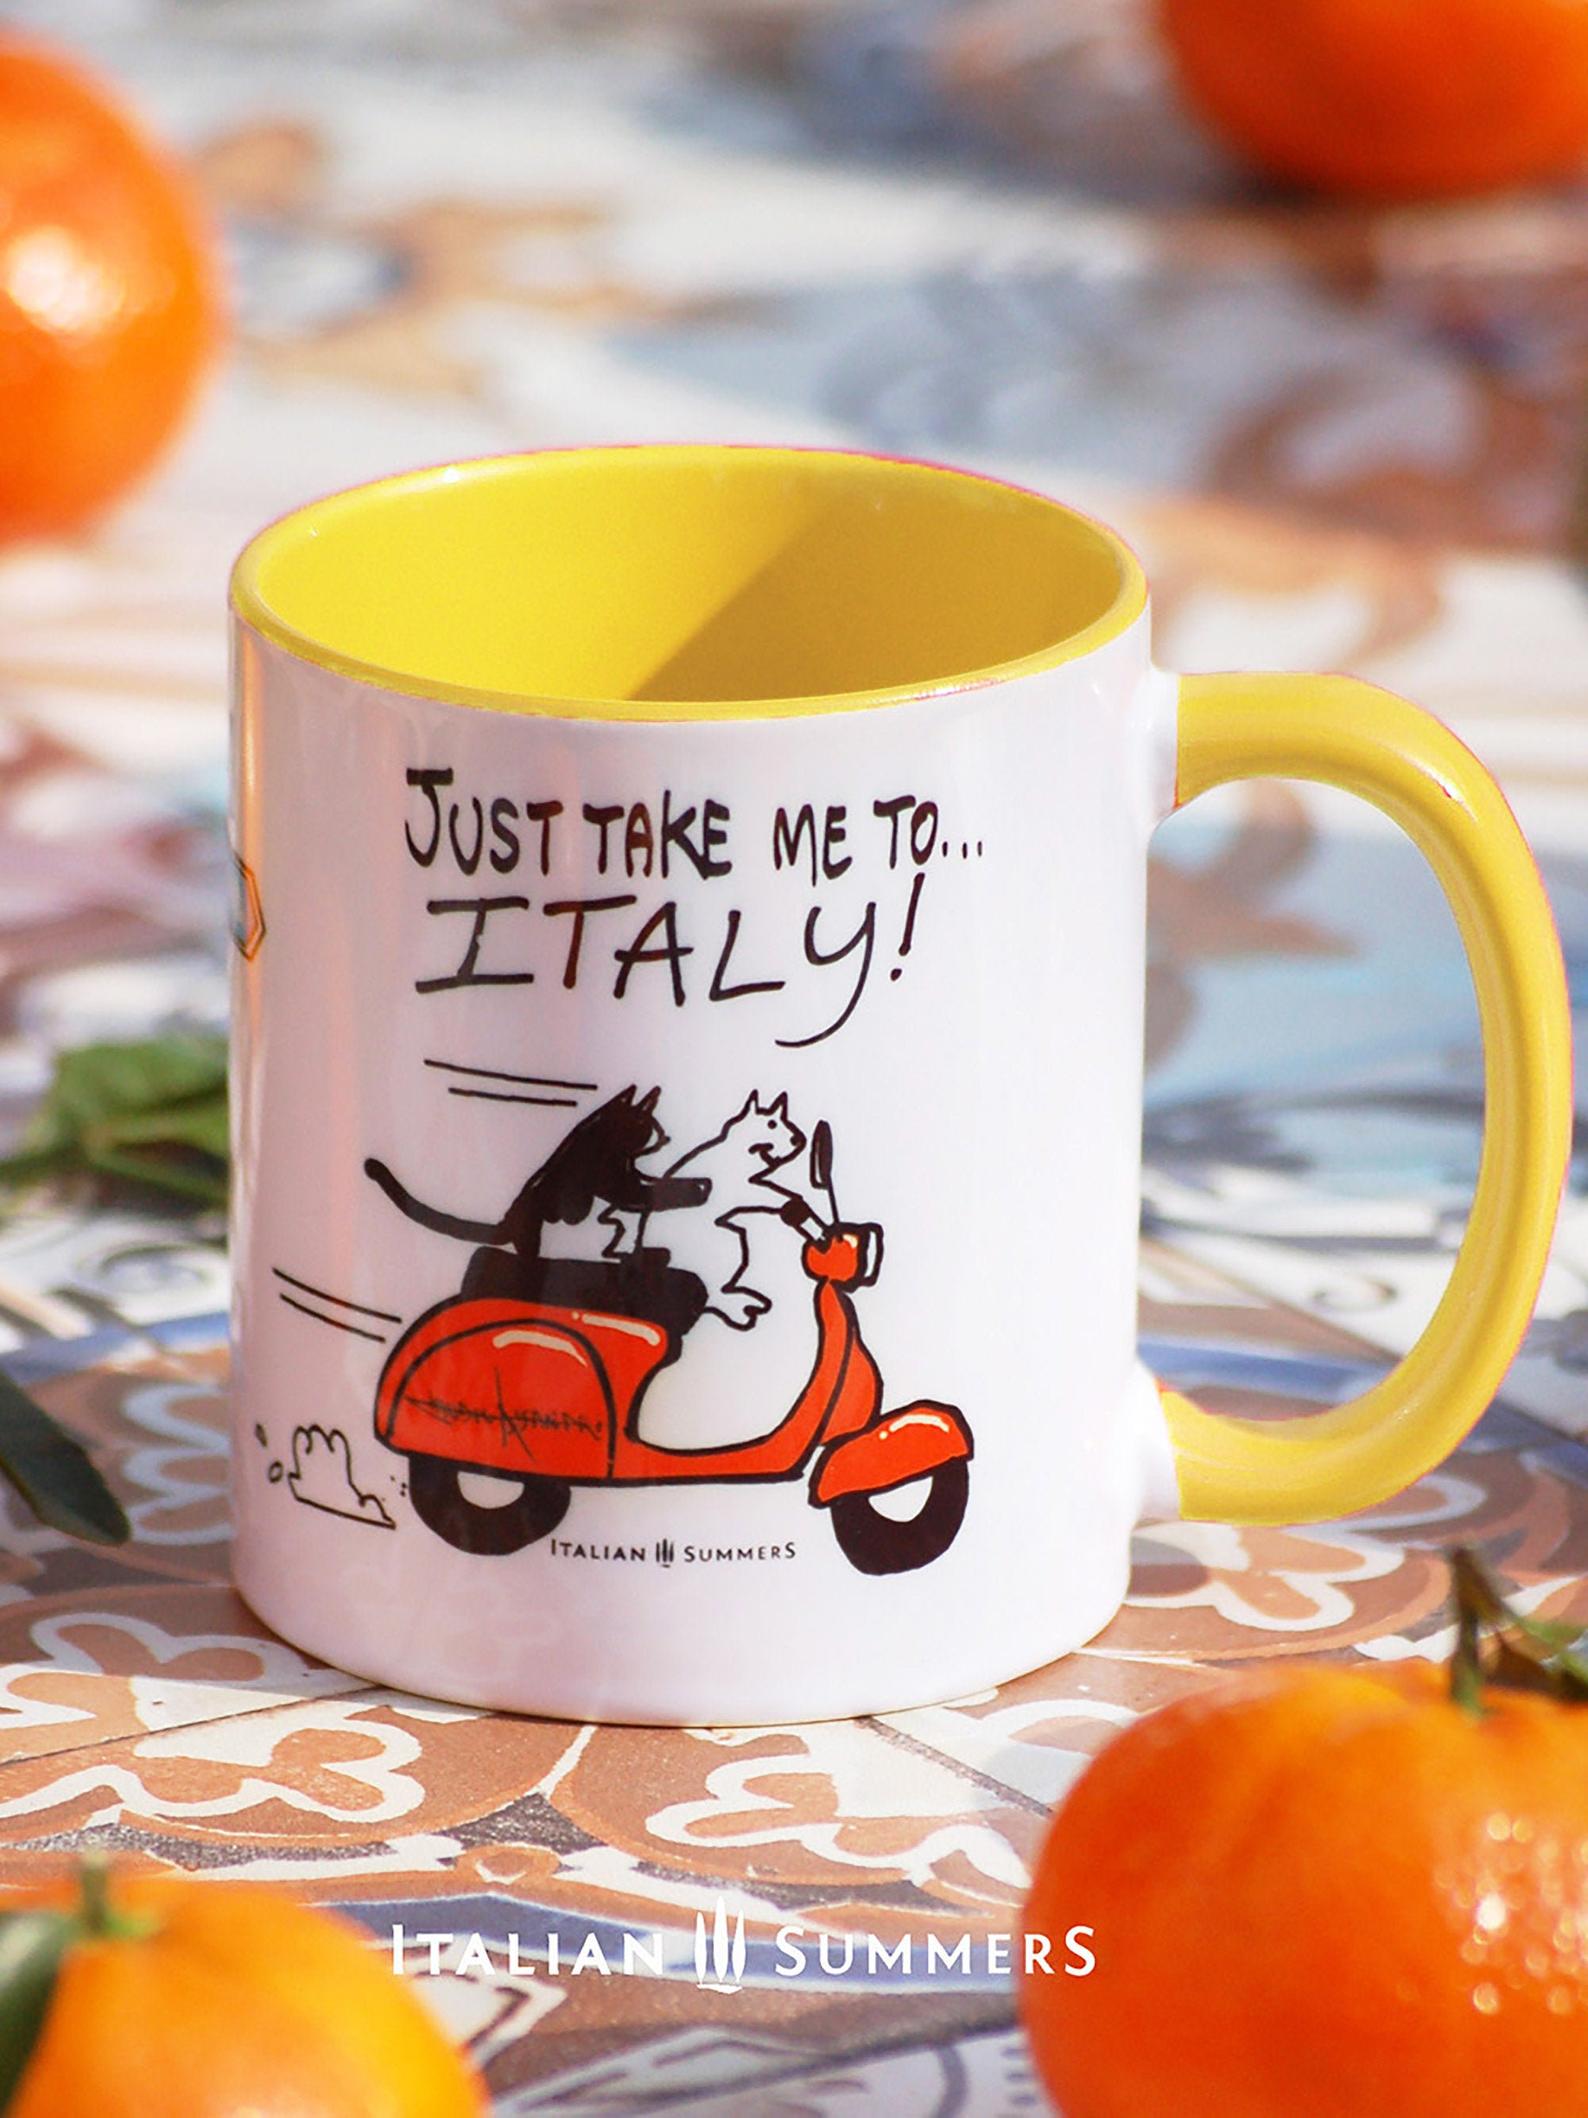 Italy inspired mug with a sketch of 2 cats driving on a vintage orange Vespa, with the quote "Just take me to Italy'. In the center of the mug is a sketch of a streetsign with the locations Positano and Tuscany. Made by Italian Summers